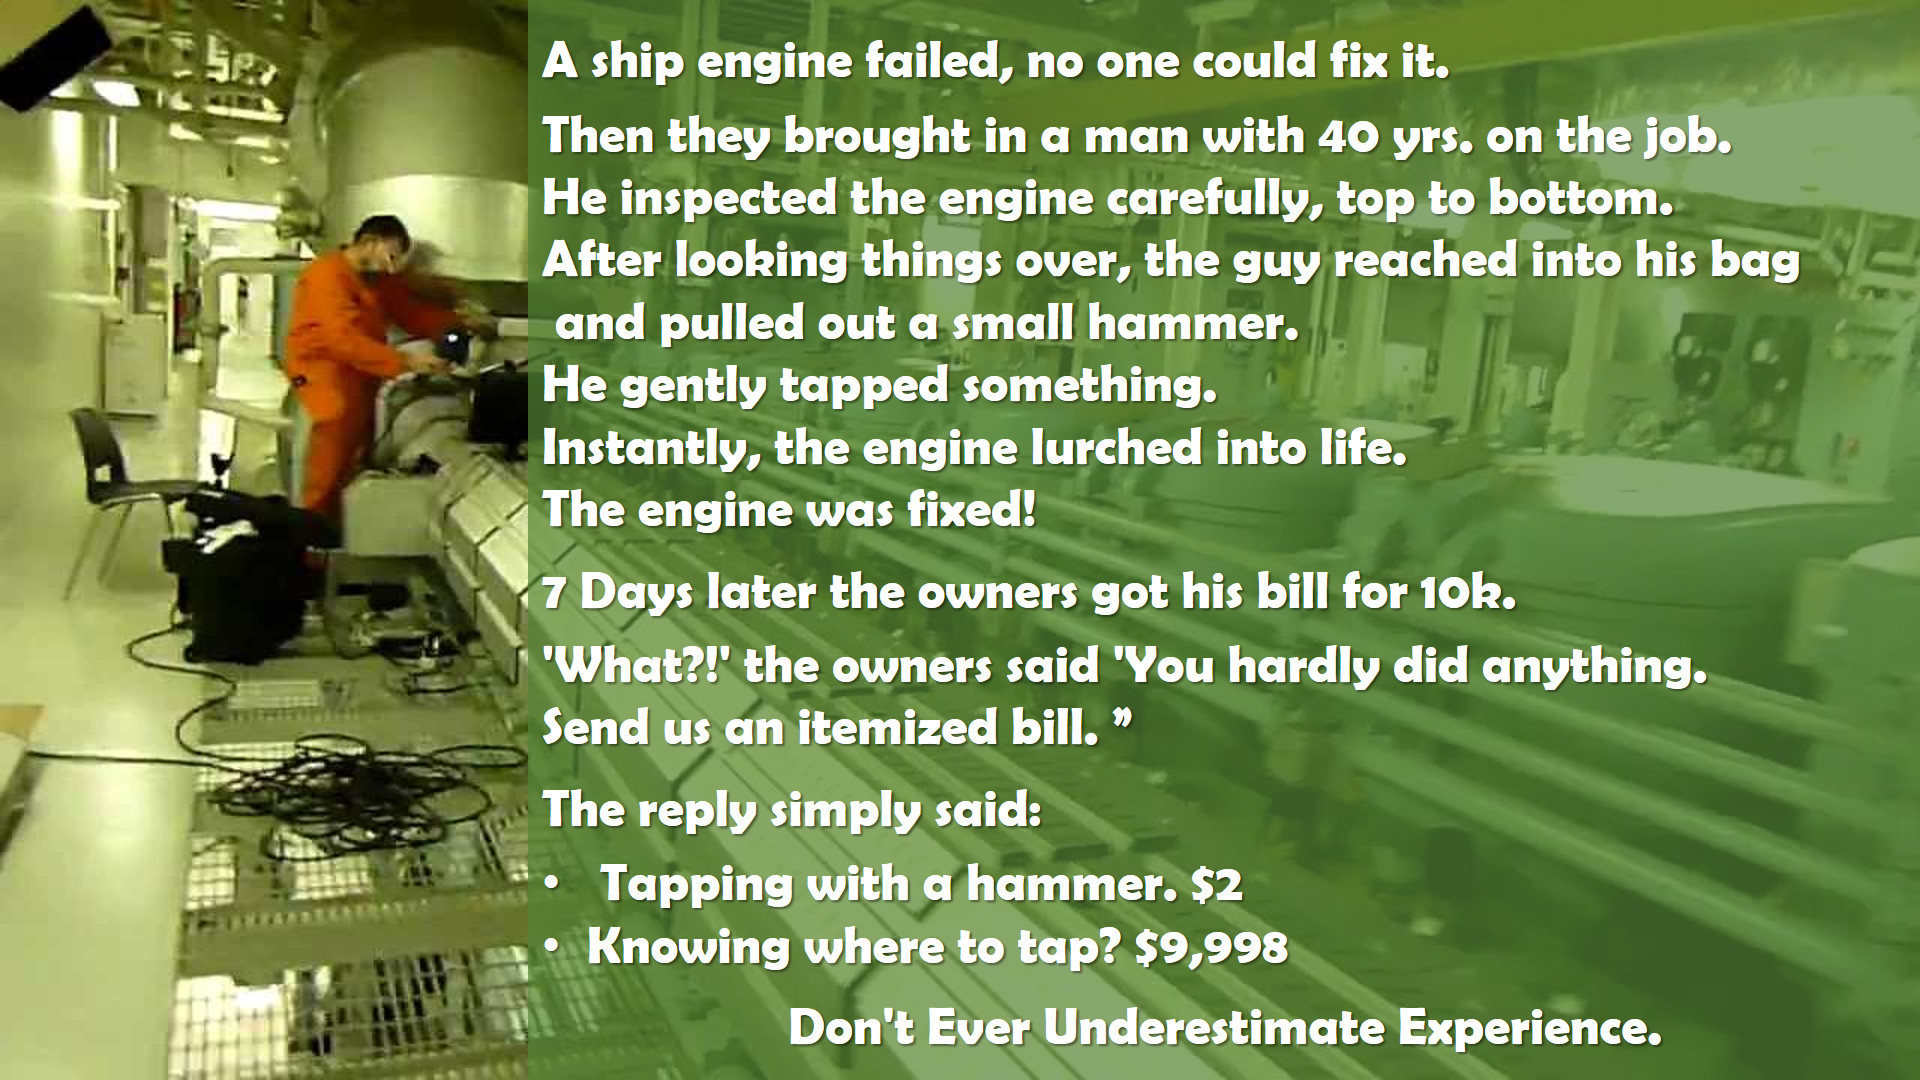 A ship engine failed, no one could fix it. Then they brought in a man with 40 years on the job. He inspected the engine carefully, top to bottom. After looking things over, the guy reached into his back and pulled out a small hammer. He gently tapped something. Instantly, the engine lurched to life. The engine was fixed! 7 days later the owners got his bill for 10K. ‘What?!’ the owners said. ‘You hardly did anything. Send us an itemized bill.’ The reply simply said: 1. Tapping with a hammer. $2 — 2. Knowing where to tap: $9,998. -Don’t Ever Underestimate Experience.-